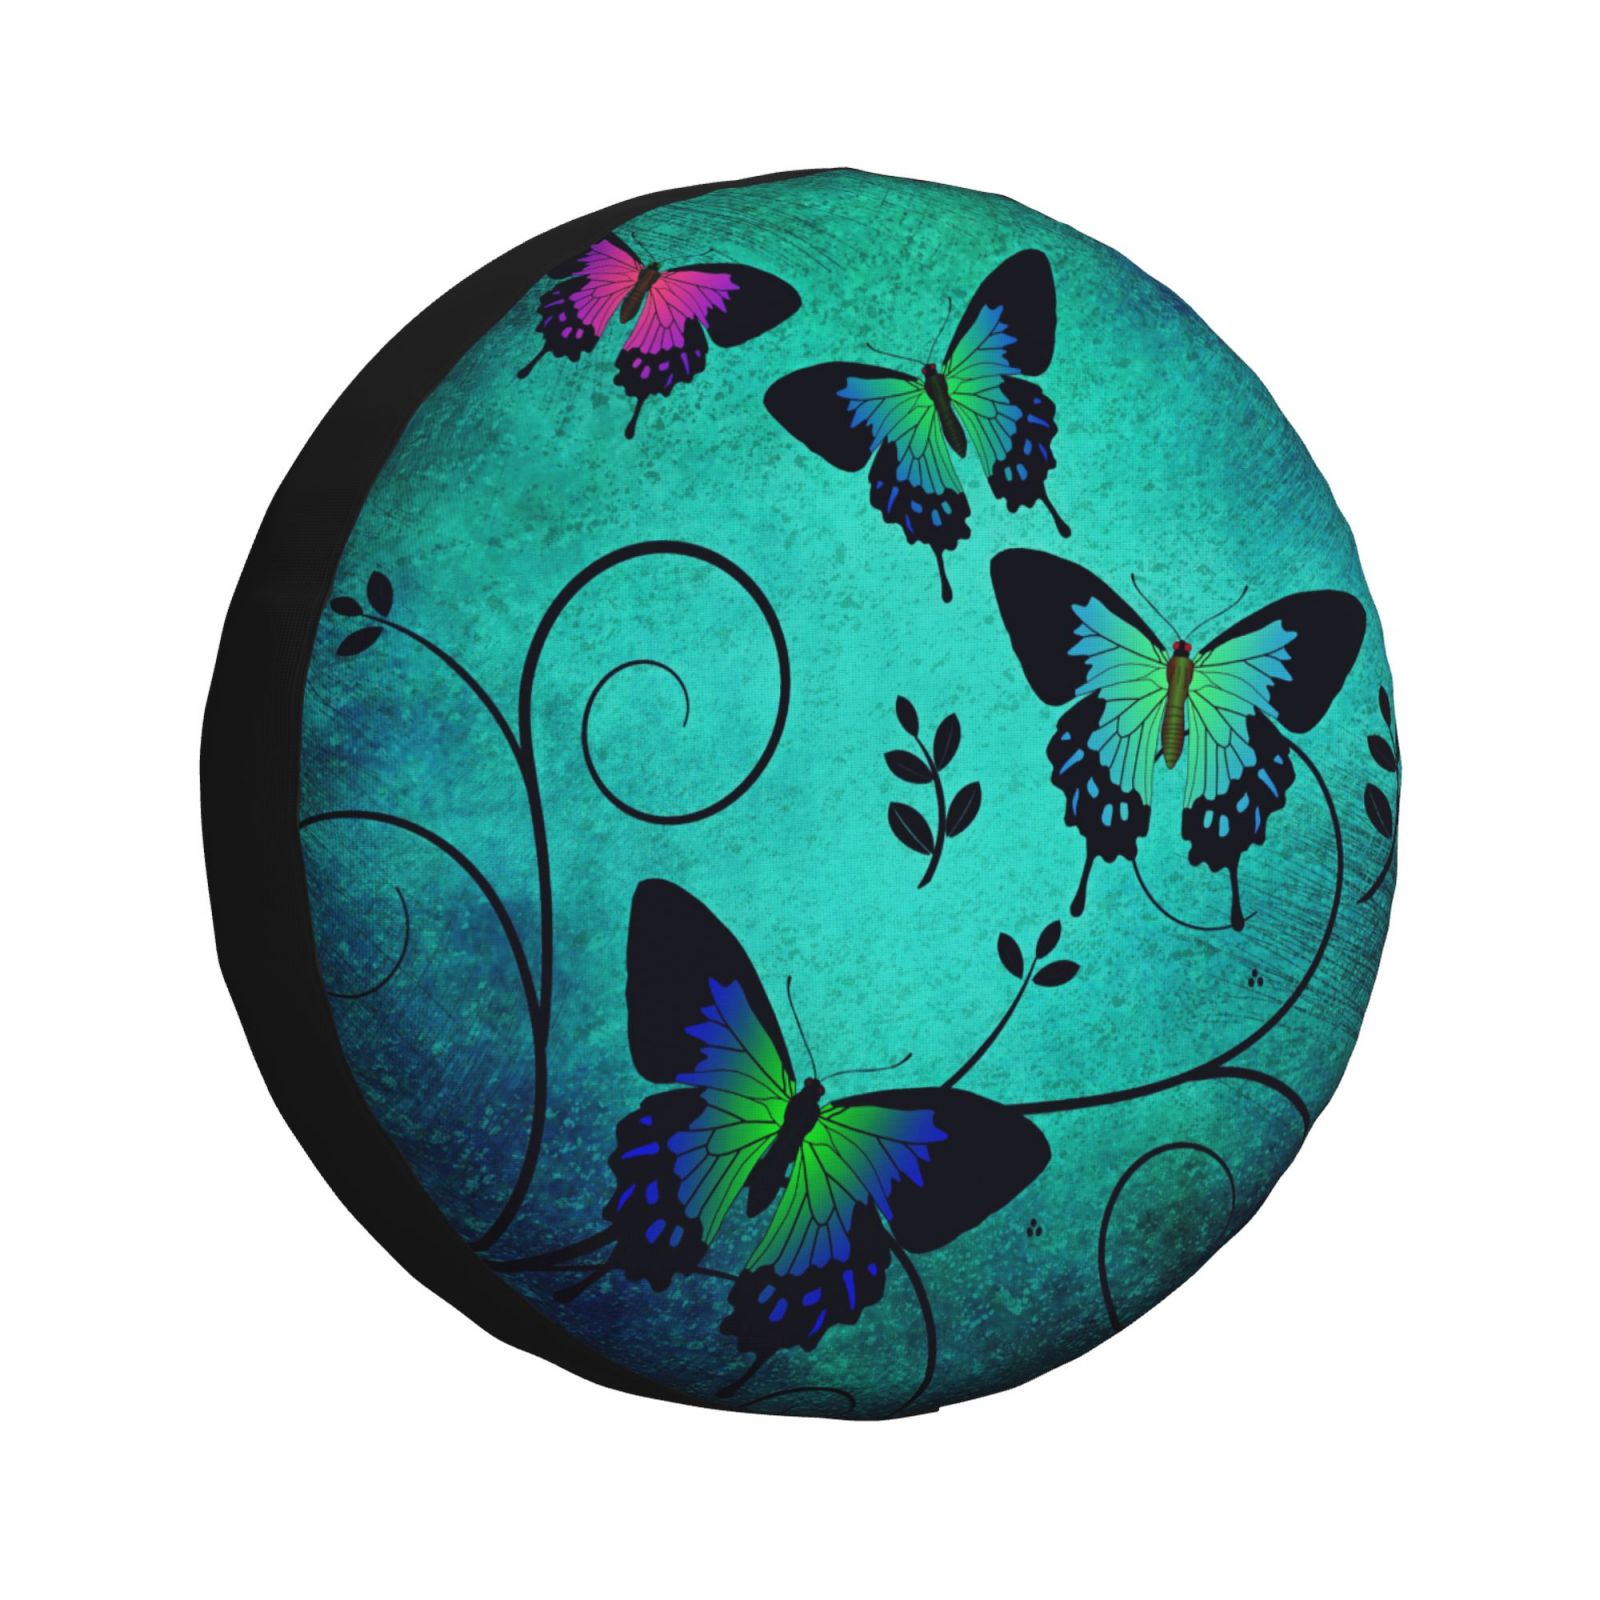 DouZhe Waterproof Spare Tire Cover, Vintage Butterflies Prints Adjustable Wheel  Covers Fit for Jeep Trailer RV SUV Car, 15 inch